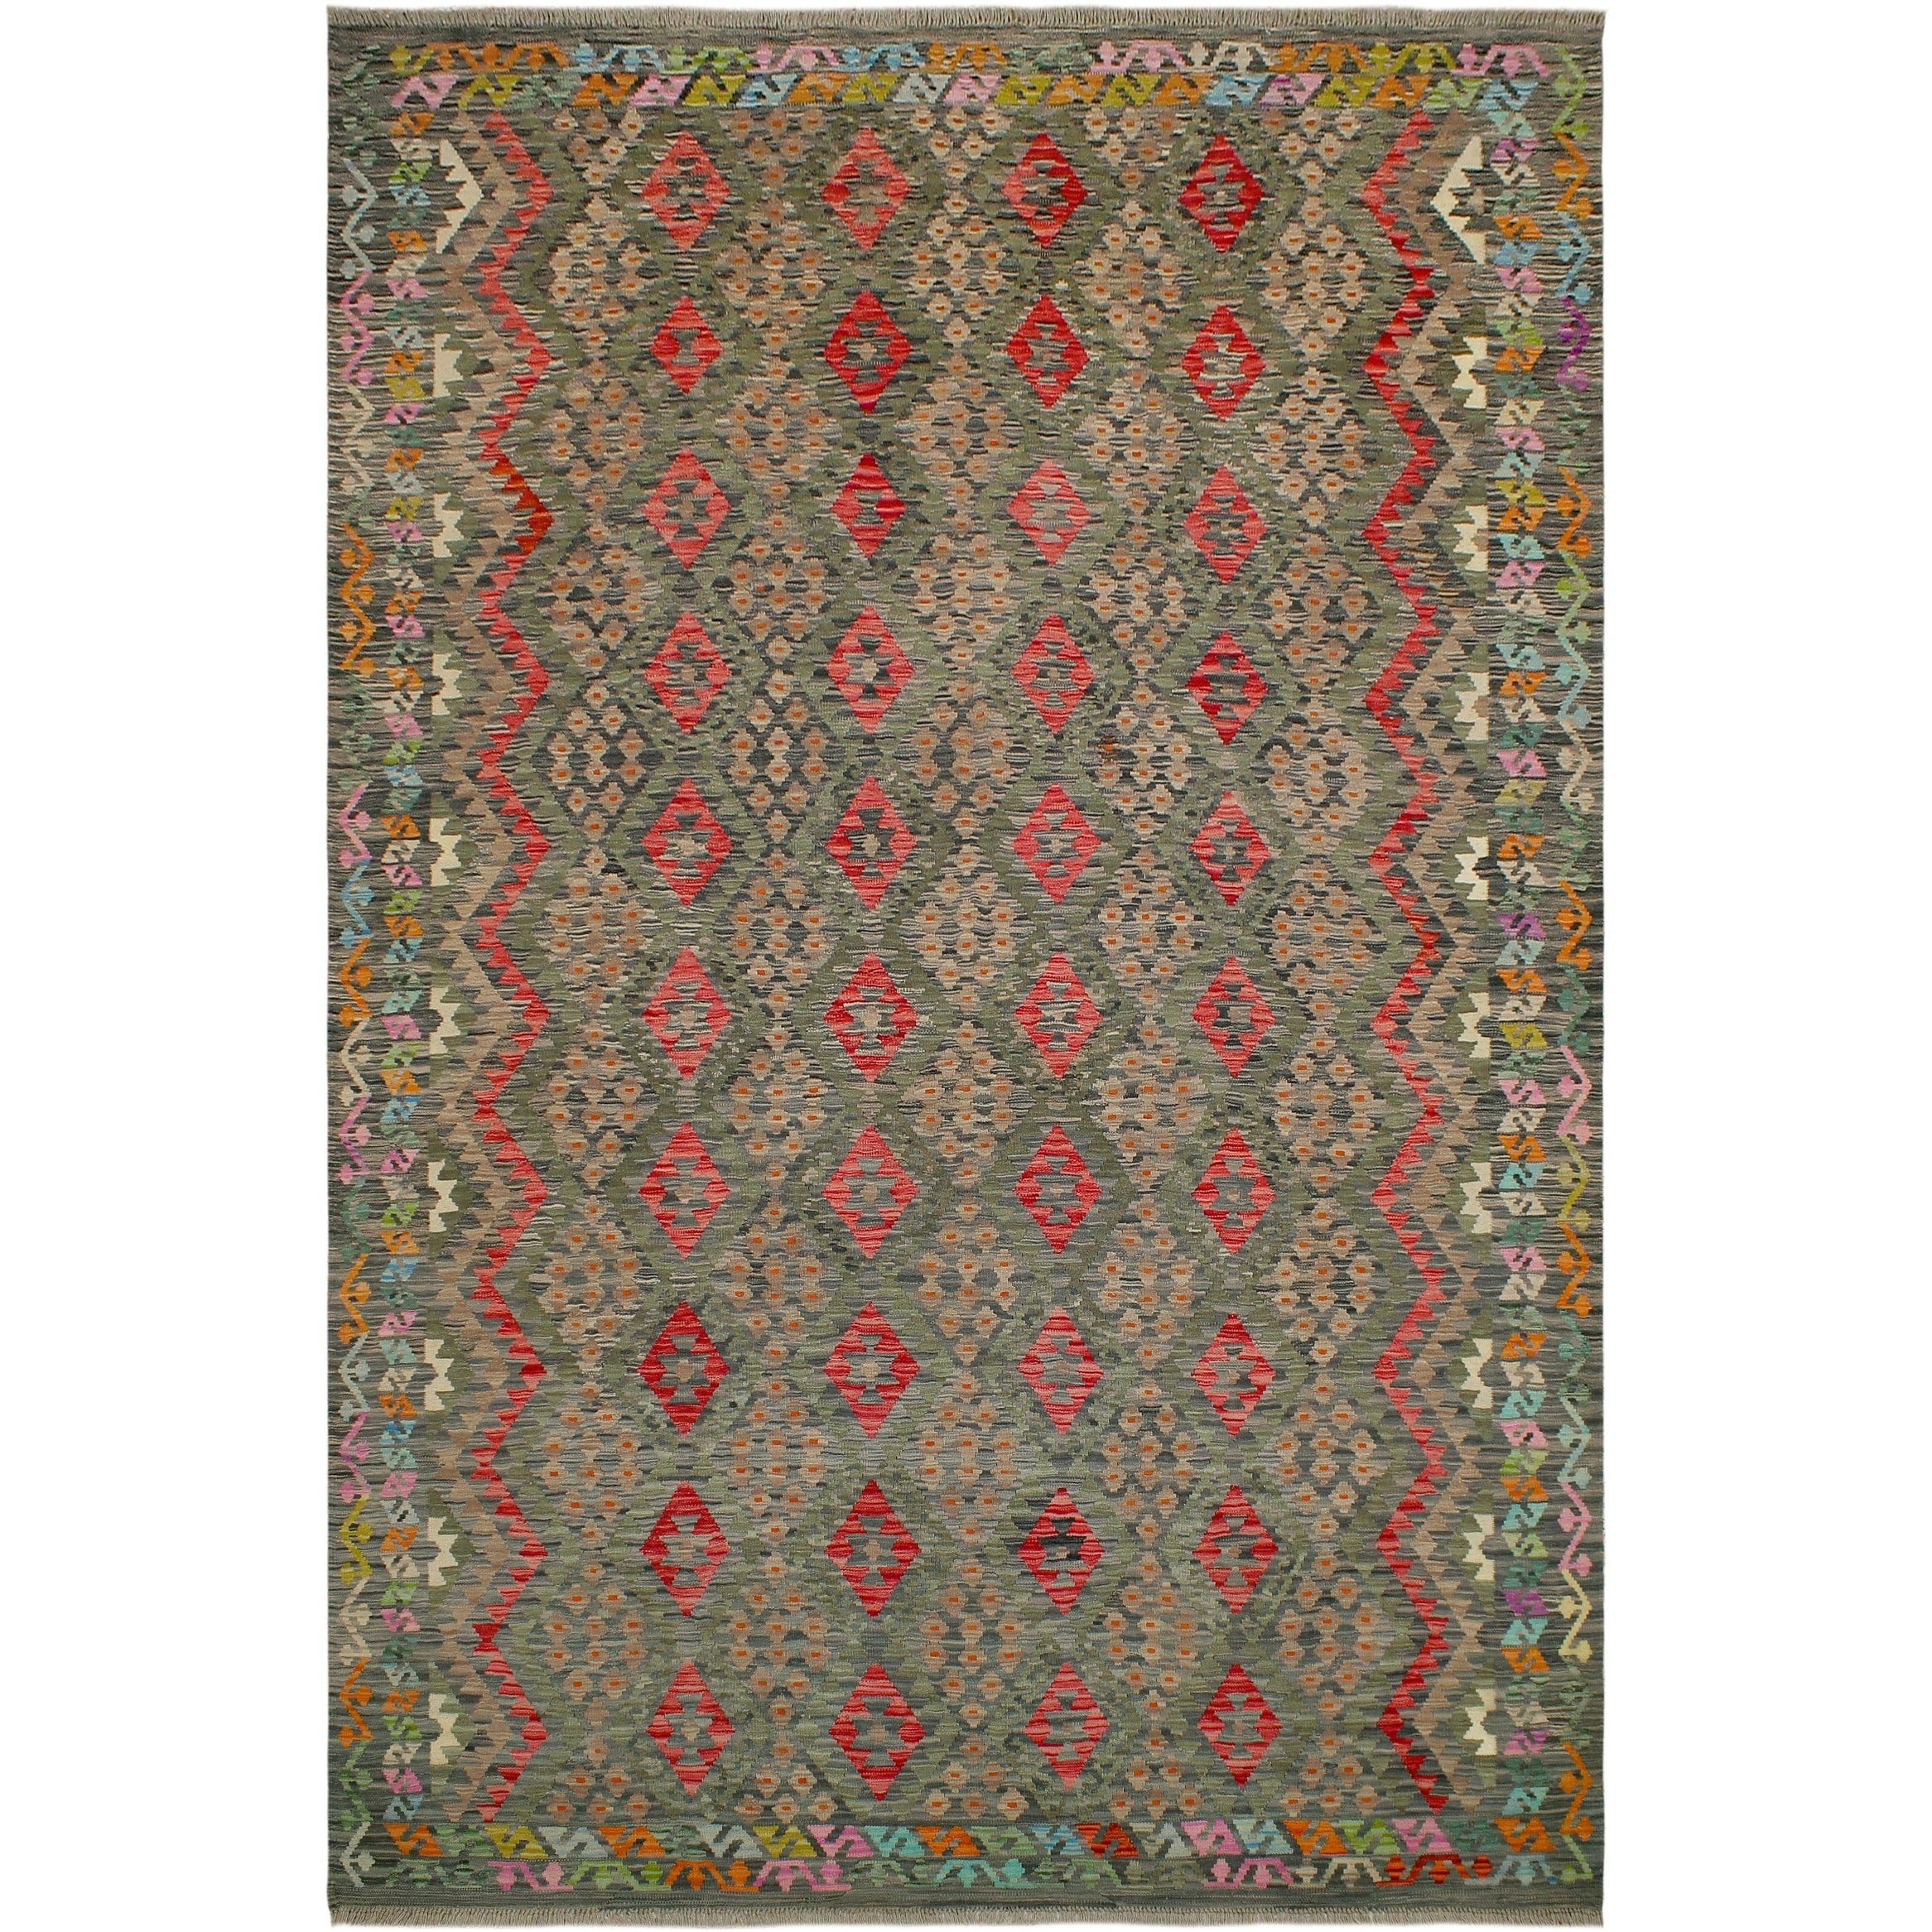 Retro Turkish Porter Green Red Kilim Wool Rug - 8 ft. 4 in. X 11 ft. 6 in.